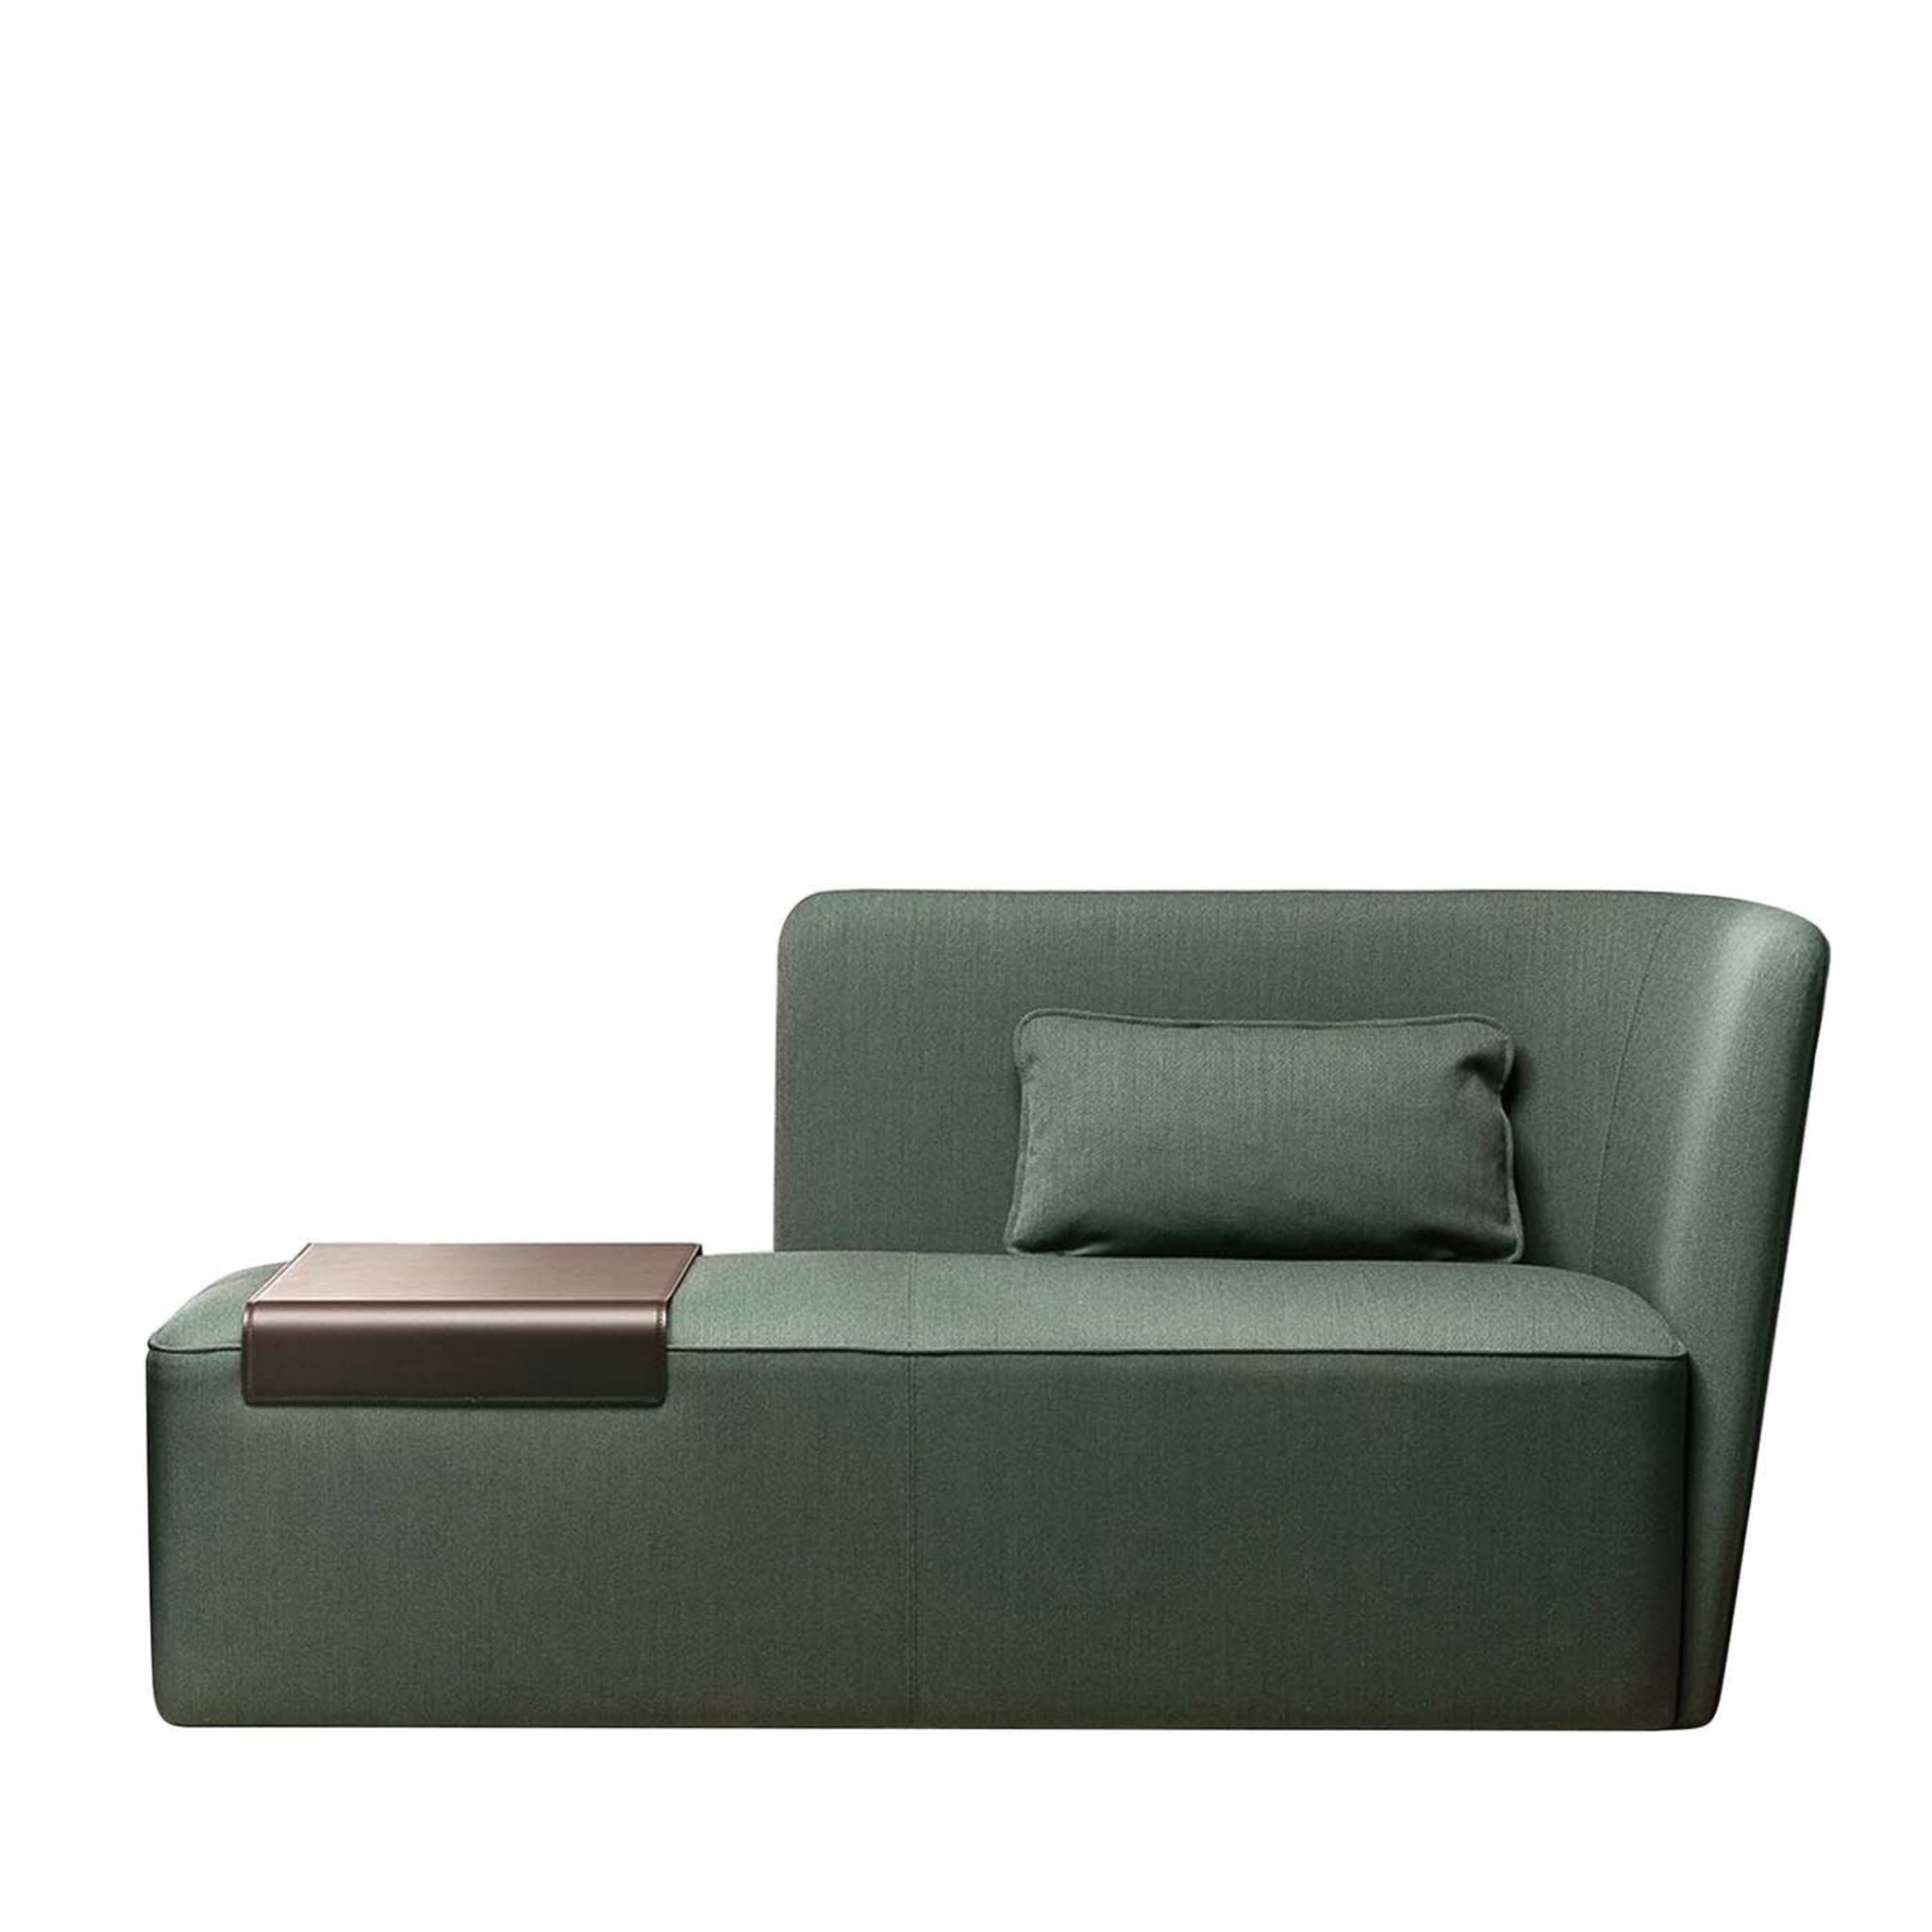 Velour Green Chaise Longue with Tray- Right - Main view